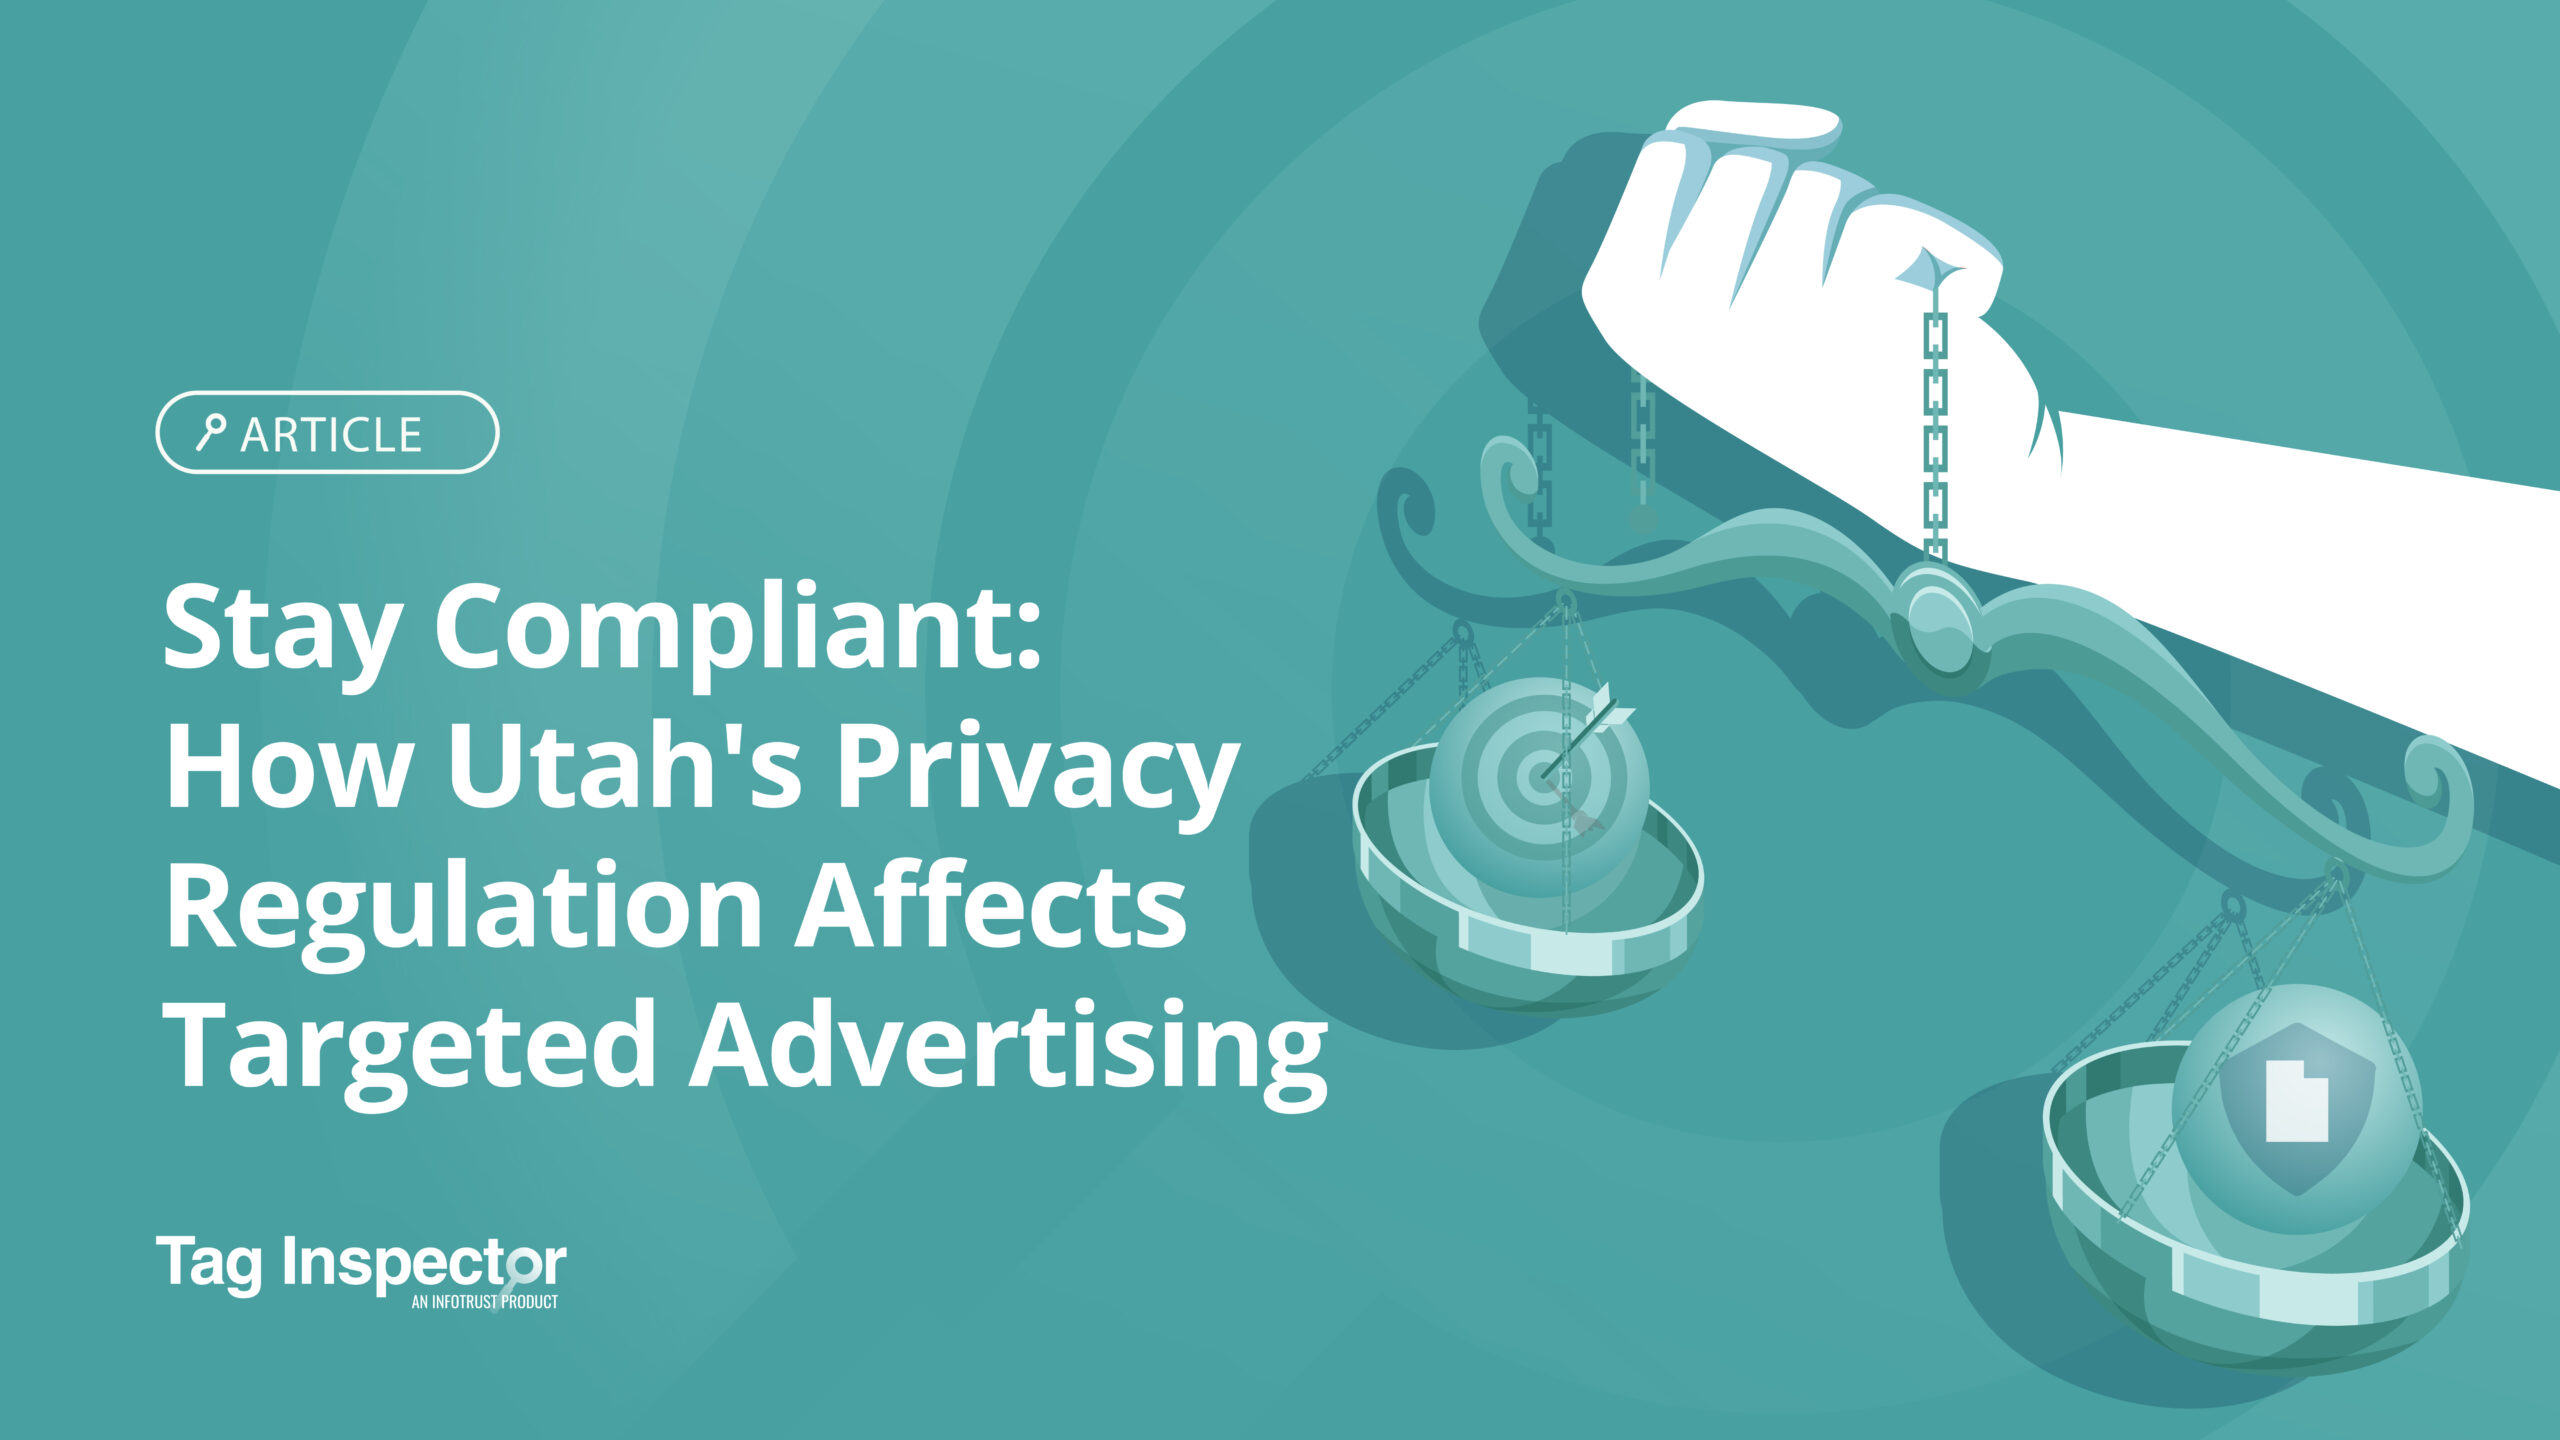 Stay Compliant: How Utah's Privacy Regulation Affects Targeted Advertising